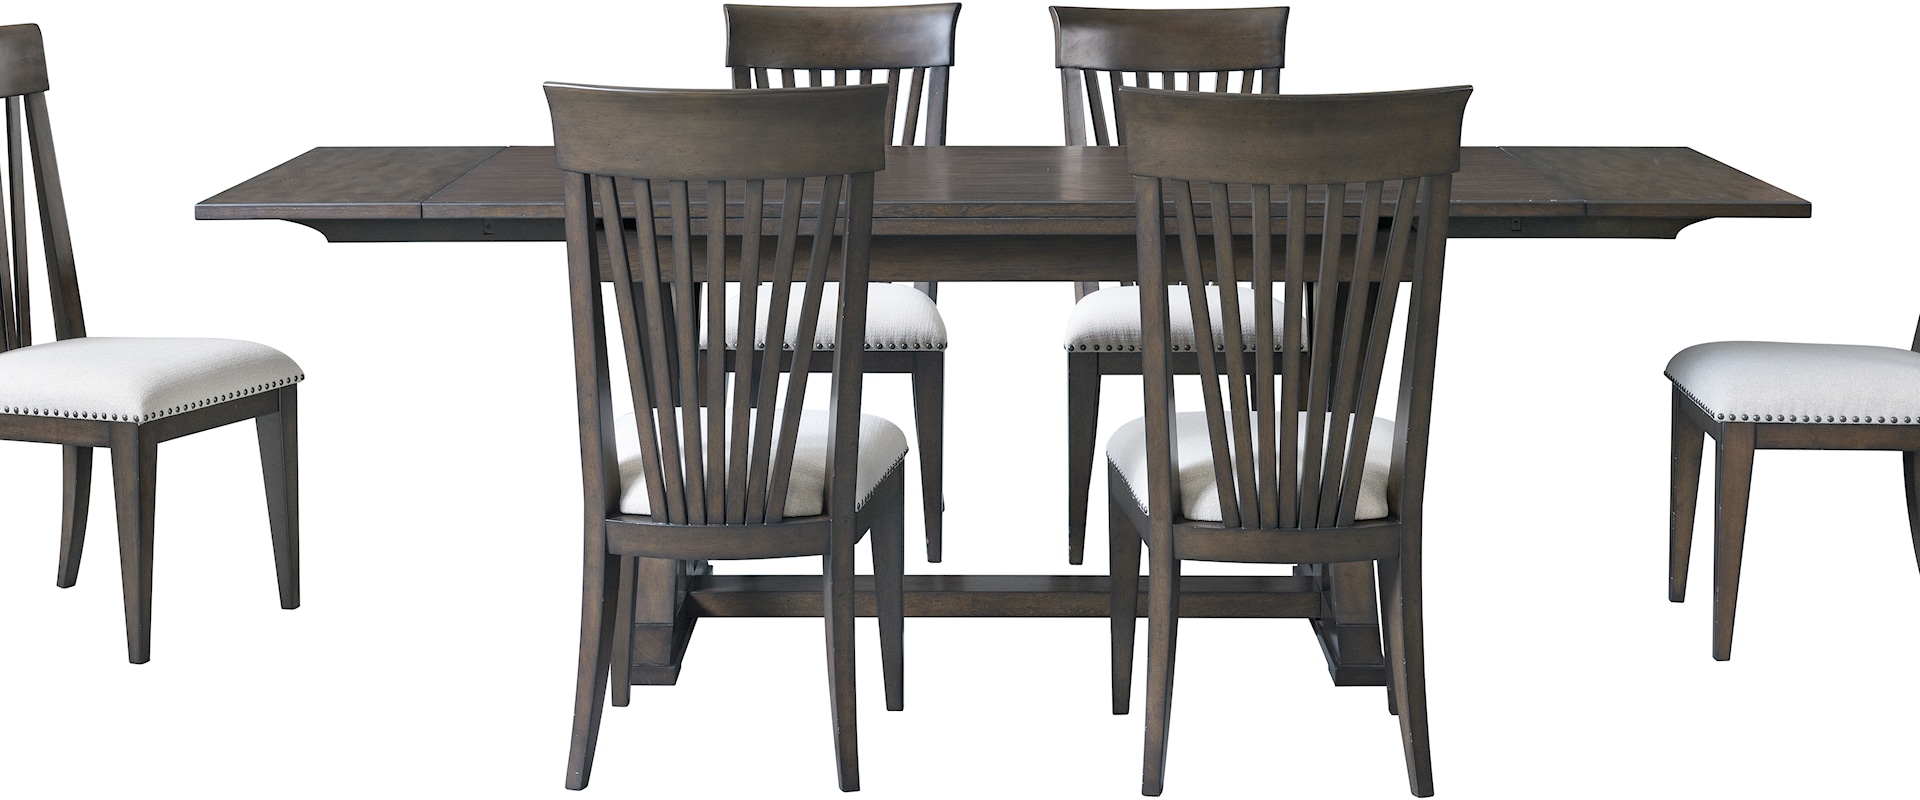 Transitional 7-Piece Dining Set with Slat Back Side Chairs